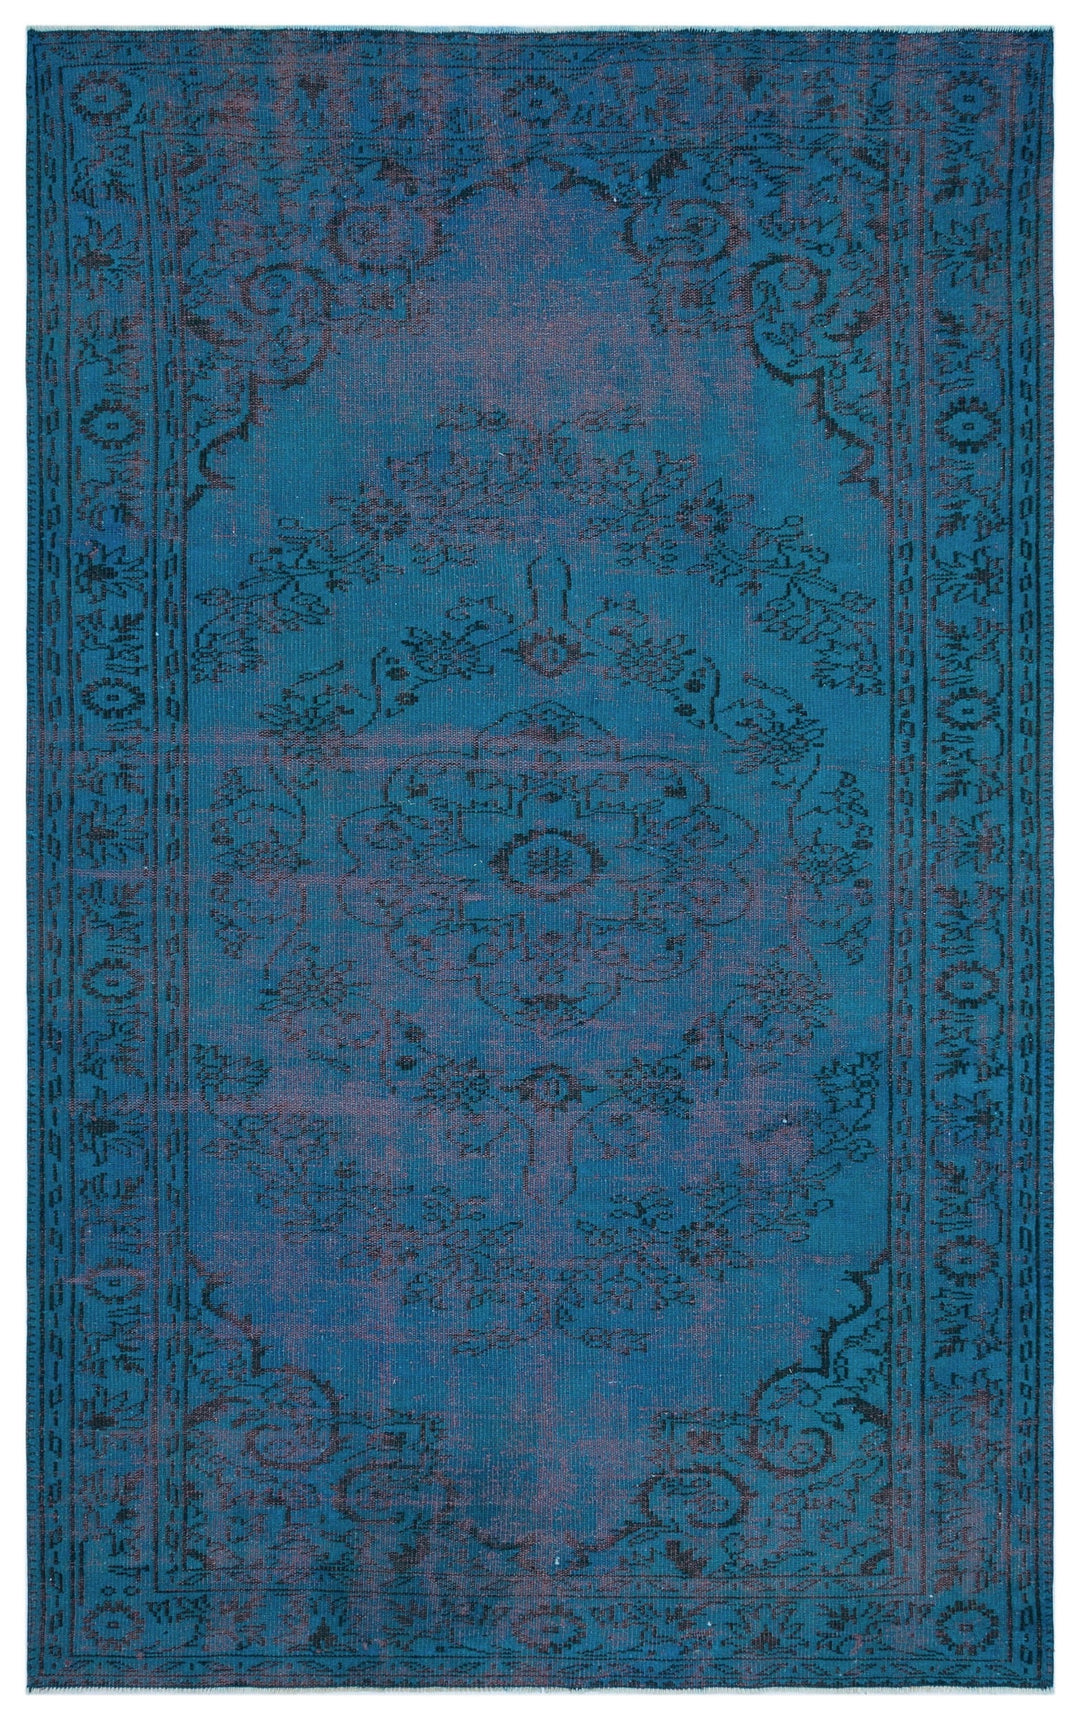 Athens Turquoise Tumbled Wool Hand Woven Carpet 178 x 288